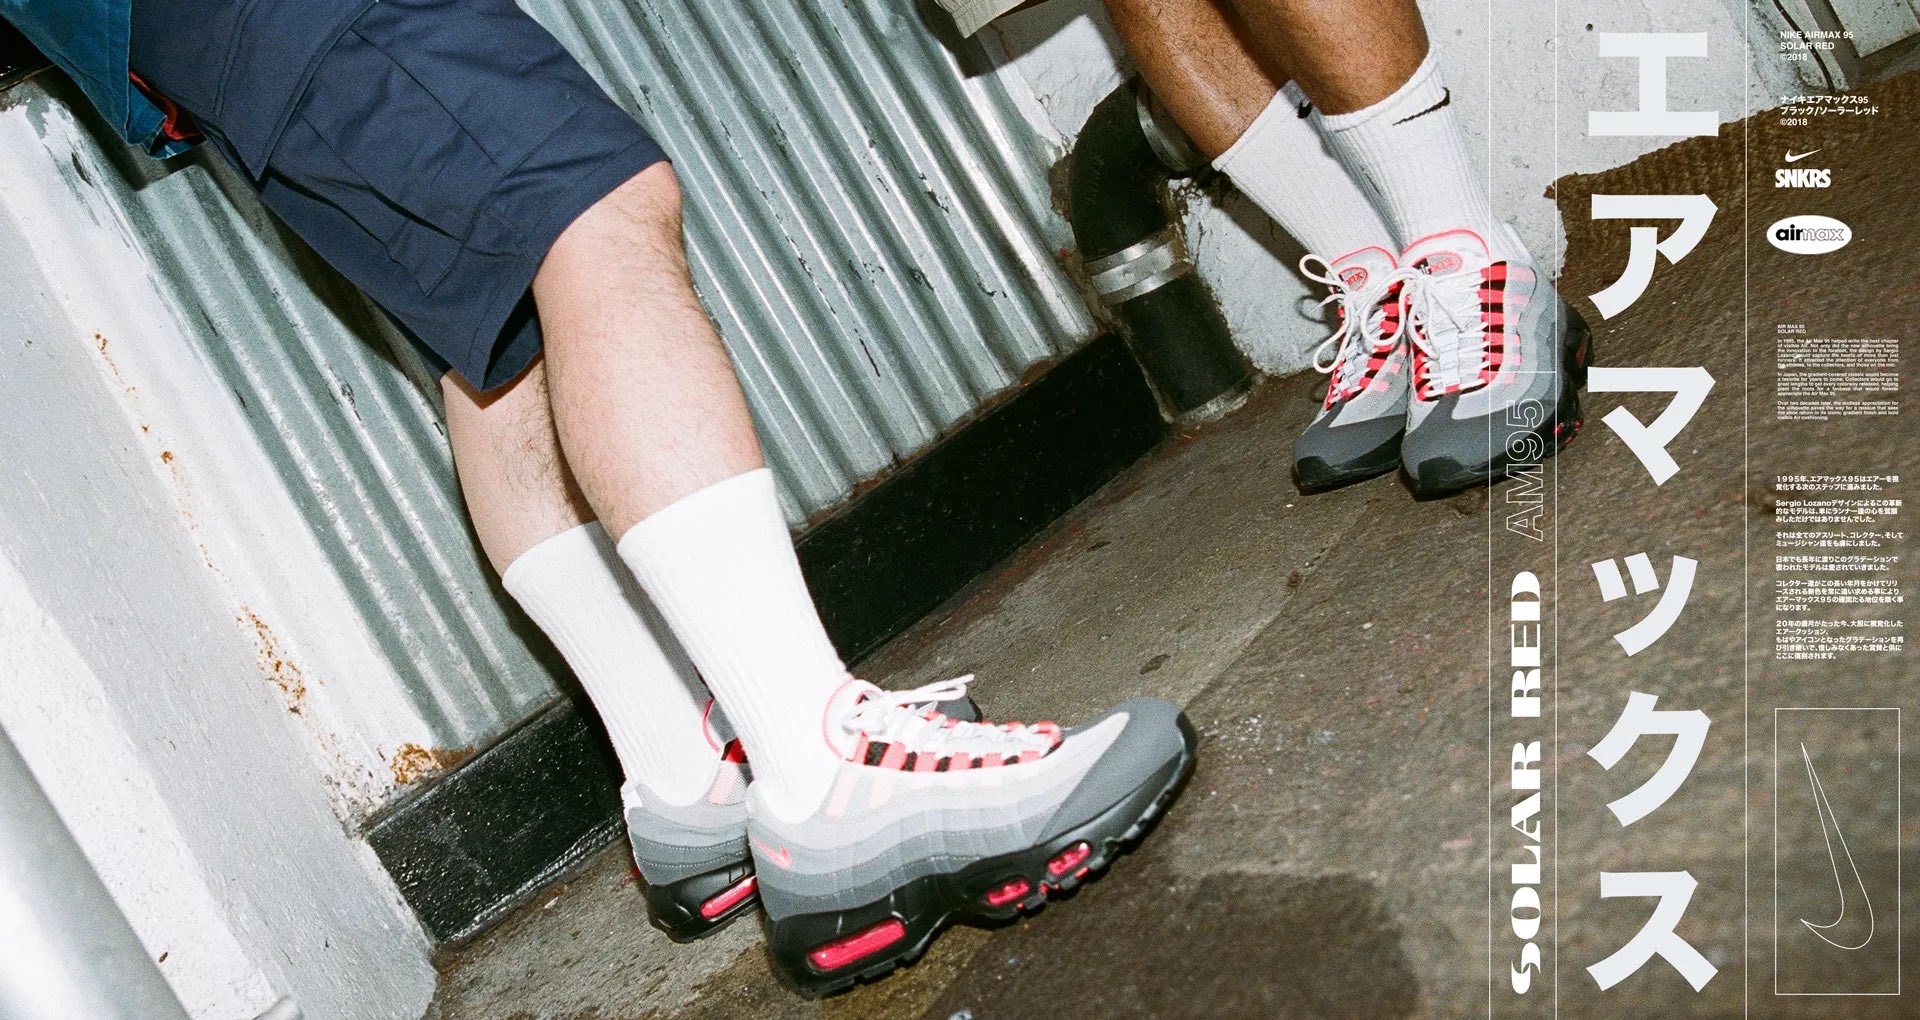 NRML on Twitter: Nike Air Max 95 'Solar Red' will be available tomorrow Thursday 19th in limited quantities instore (Rideau) and online! https://t.co/Ieh1EZYdnL" Twitter